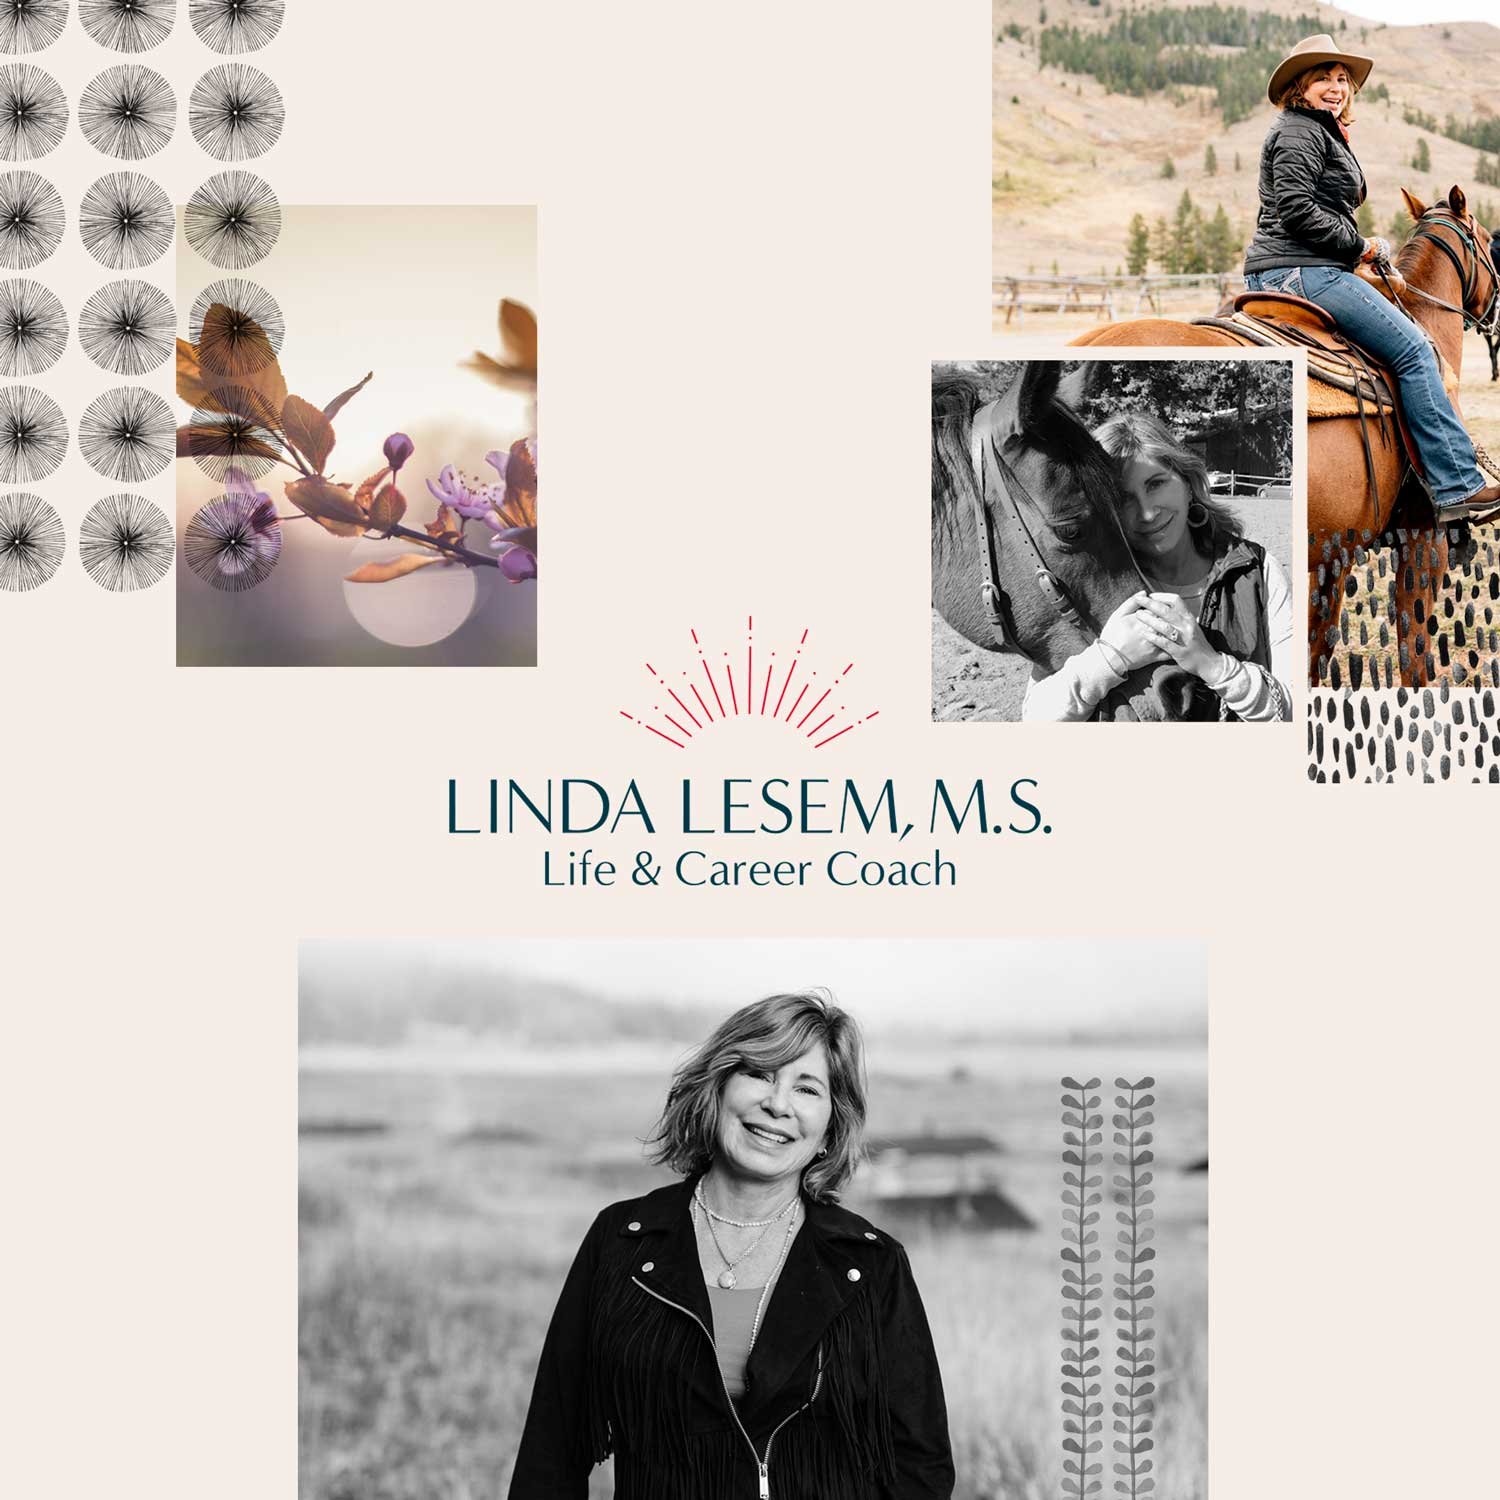 Linda Lesem, life/career coach, partners with clients to discover their best self, creating positive change through a personalized approach.